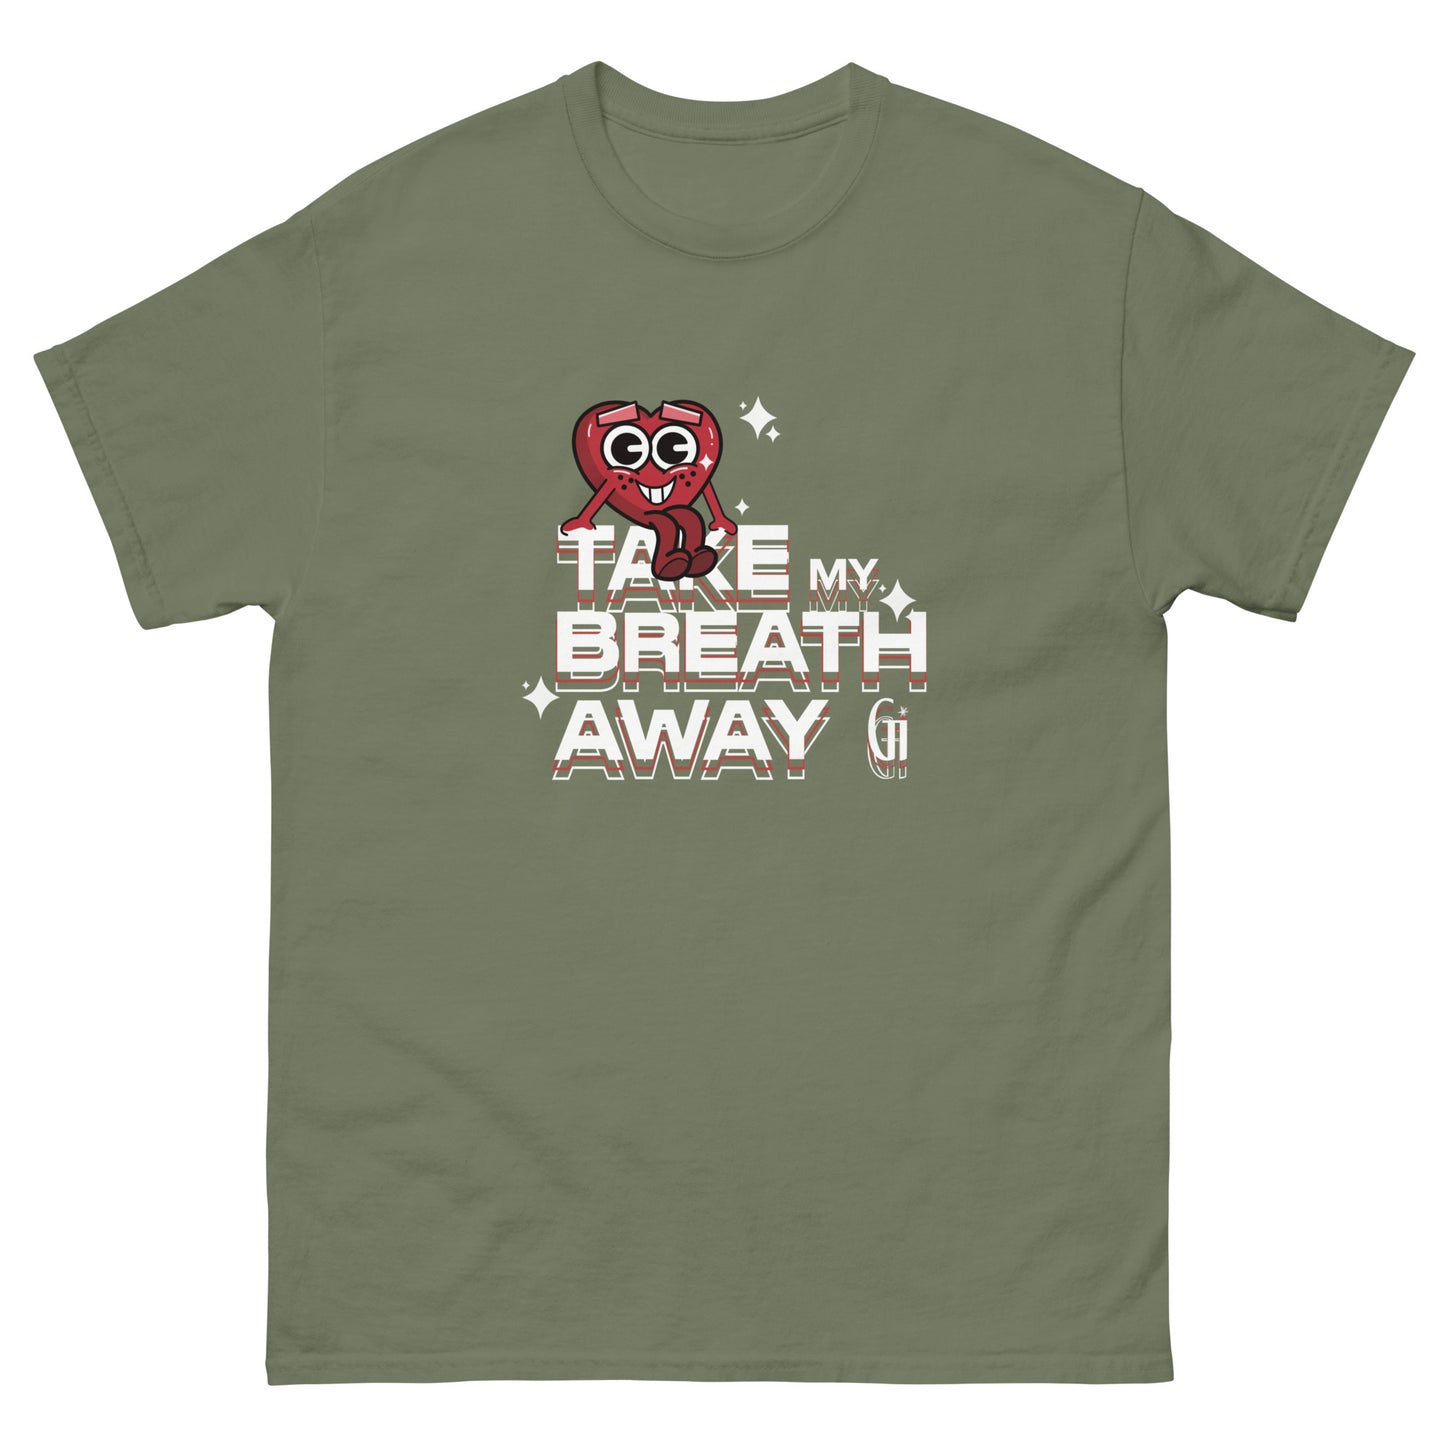 military green color unisex cotton t shirt with heart